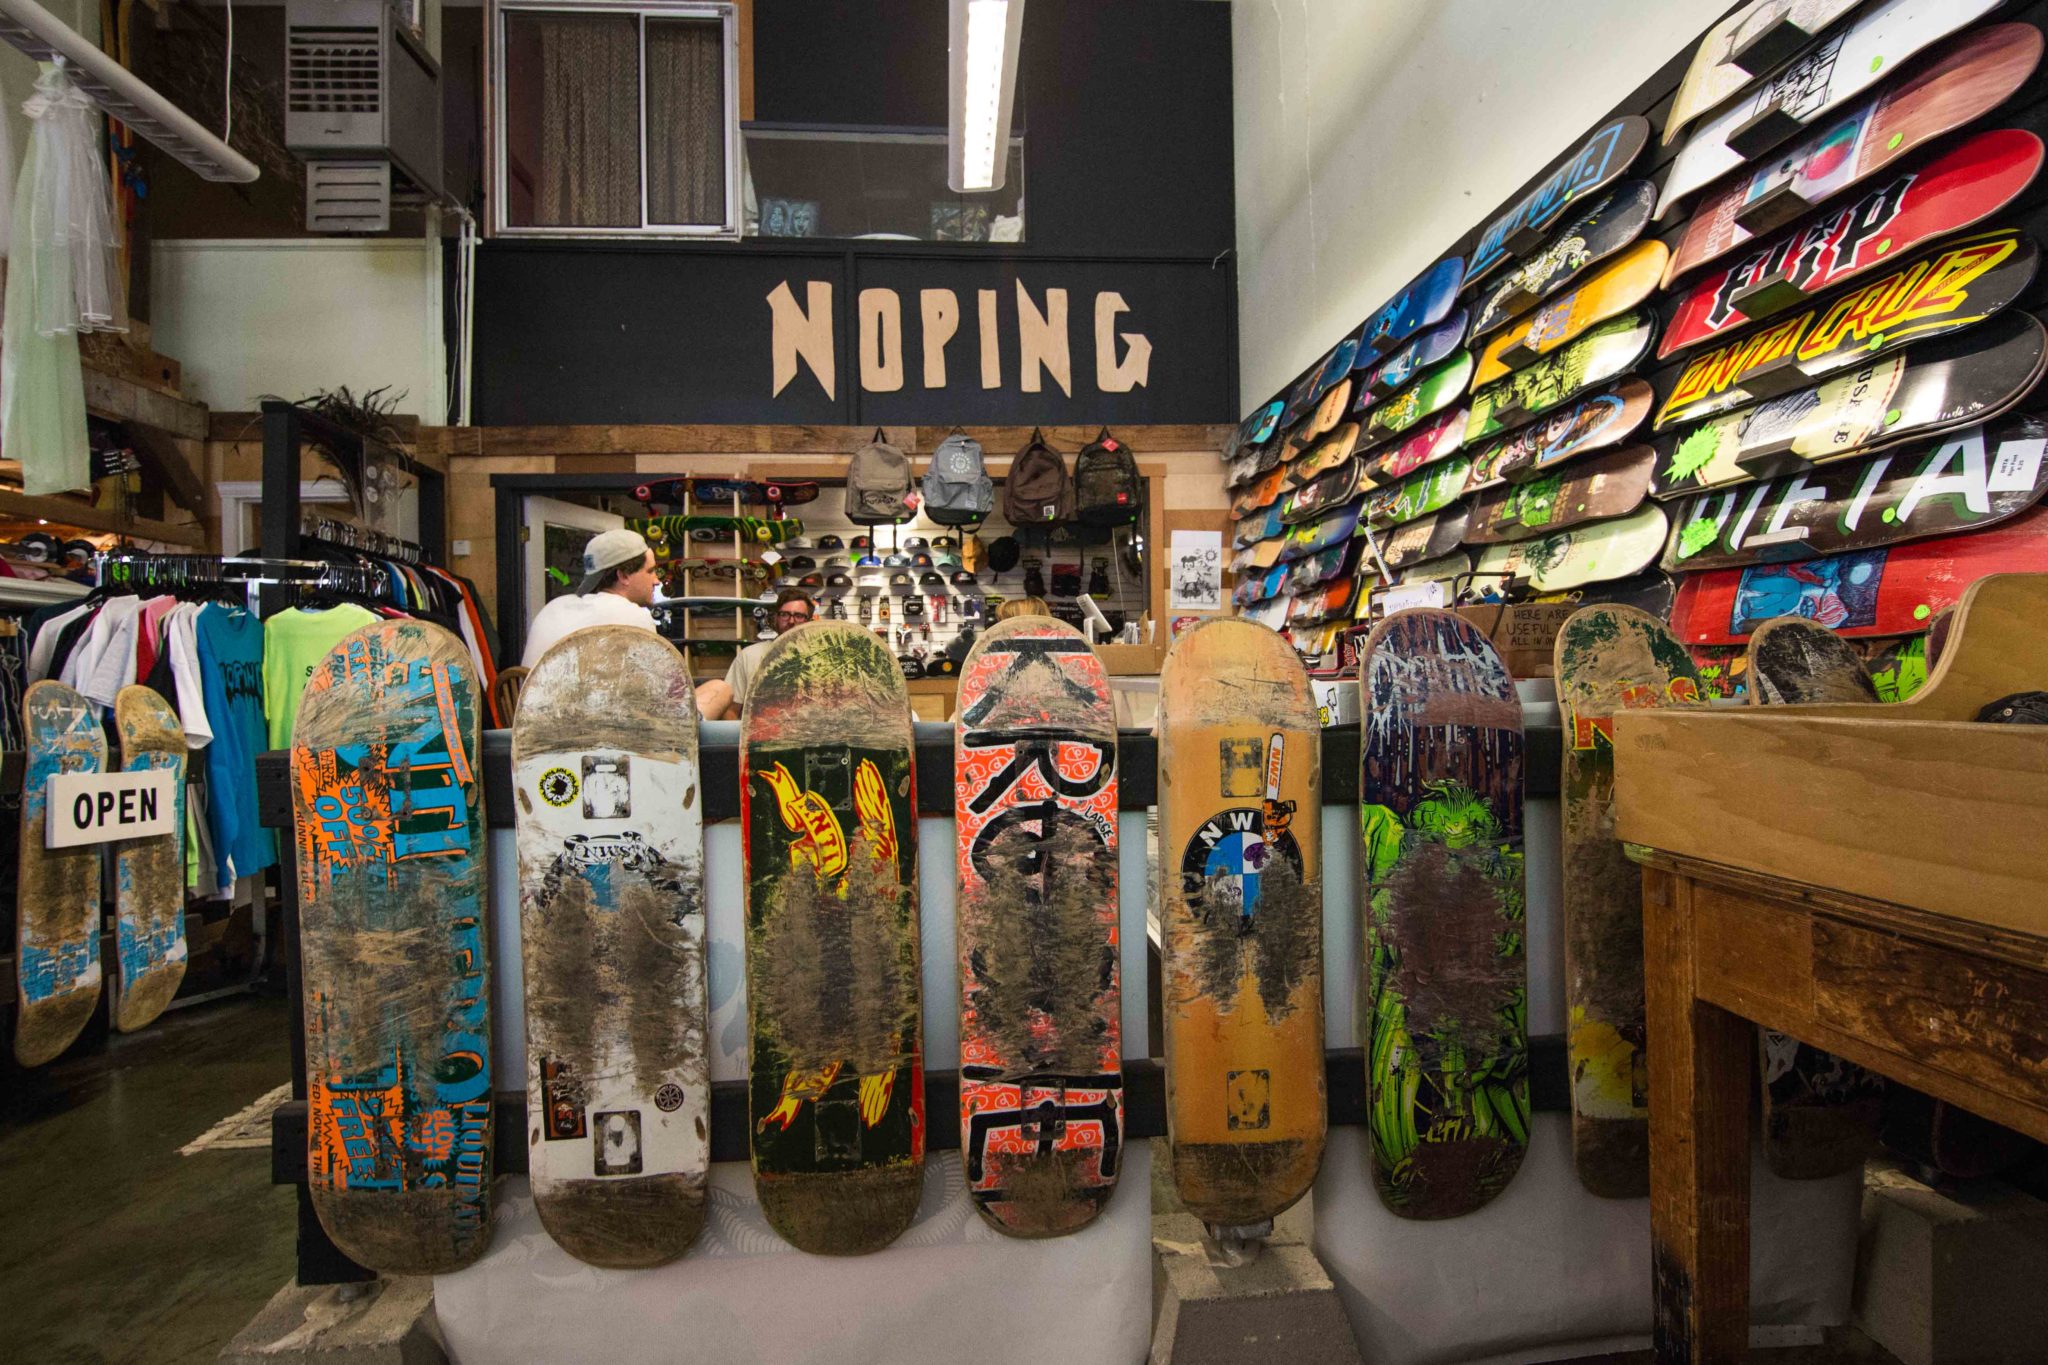 Noping The Shop is More than Just Skateboards